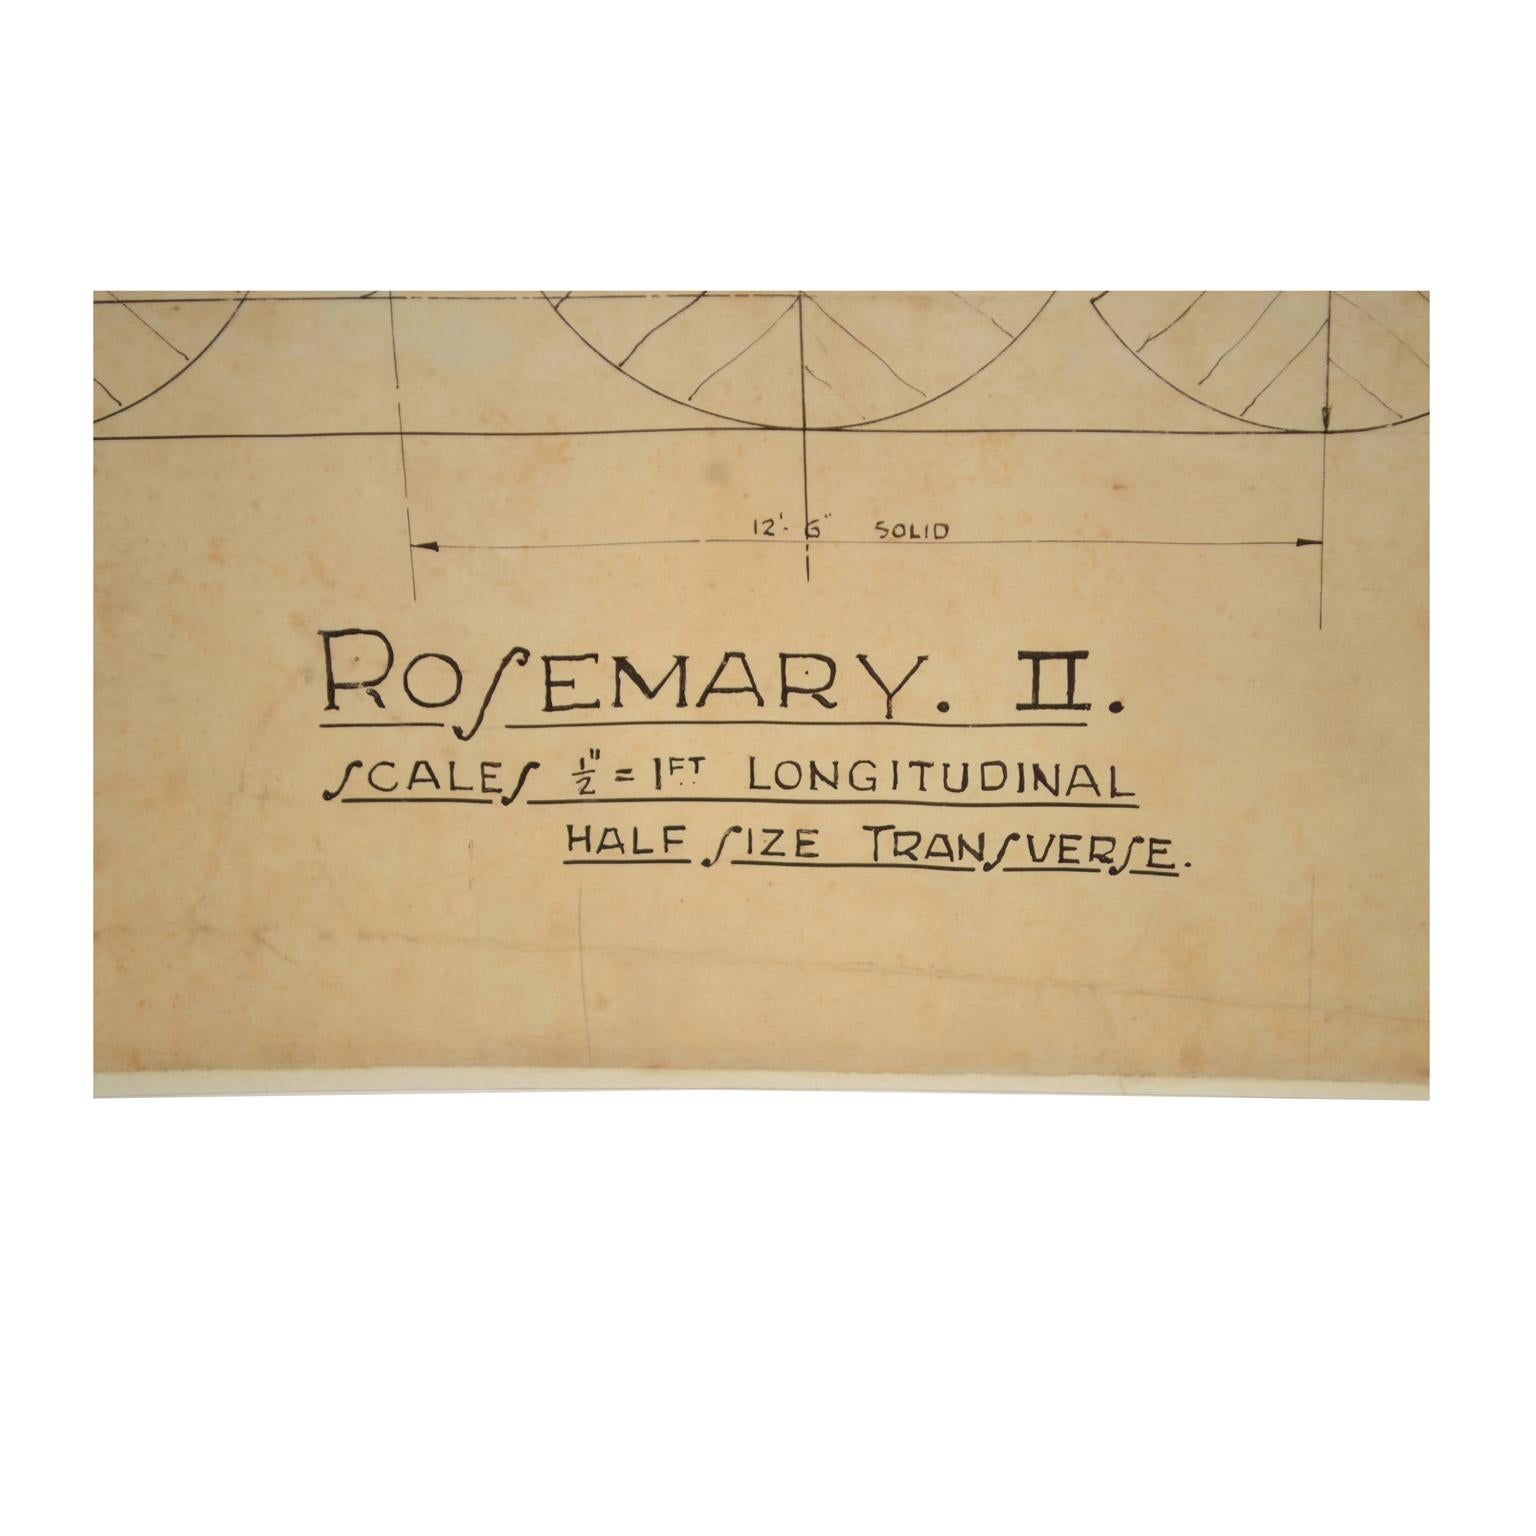 Rosemary is a project by William Fife III and it was launched in his Scottish shipyard in 1925. This boat has a sloop rig. Measures: cm 112.5 x 64 H - inches 44.29 x 25.19 H.
Project coming from the archives of Uffa Fox, an English boat designer and